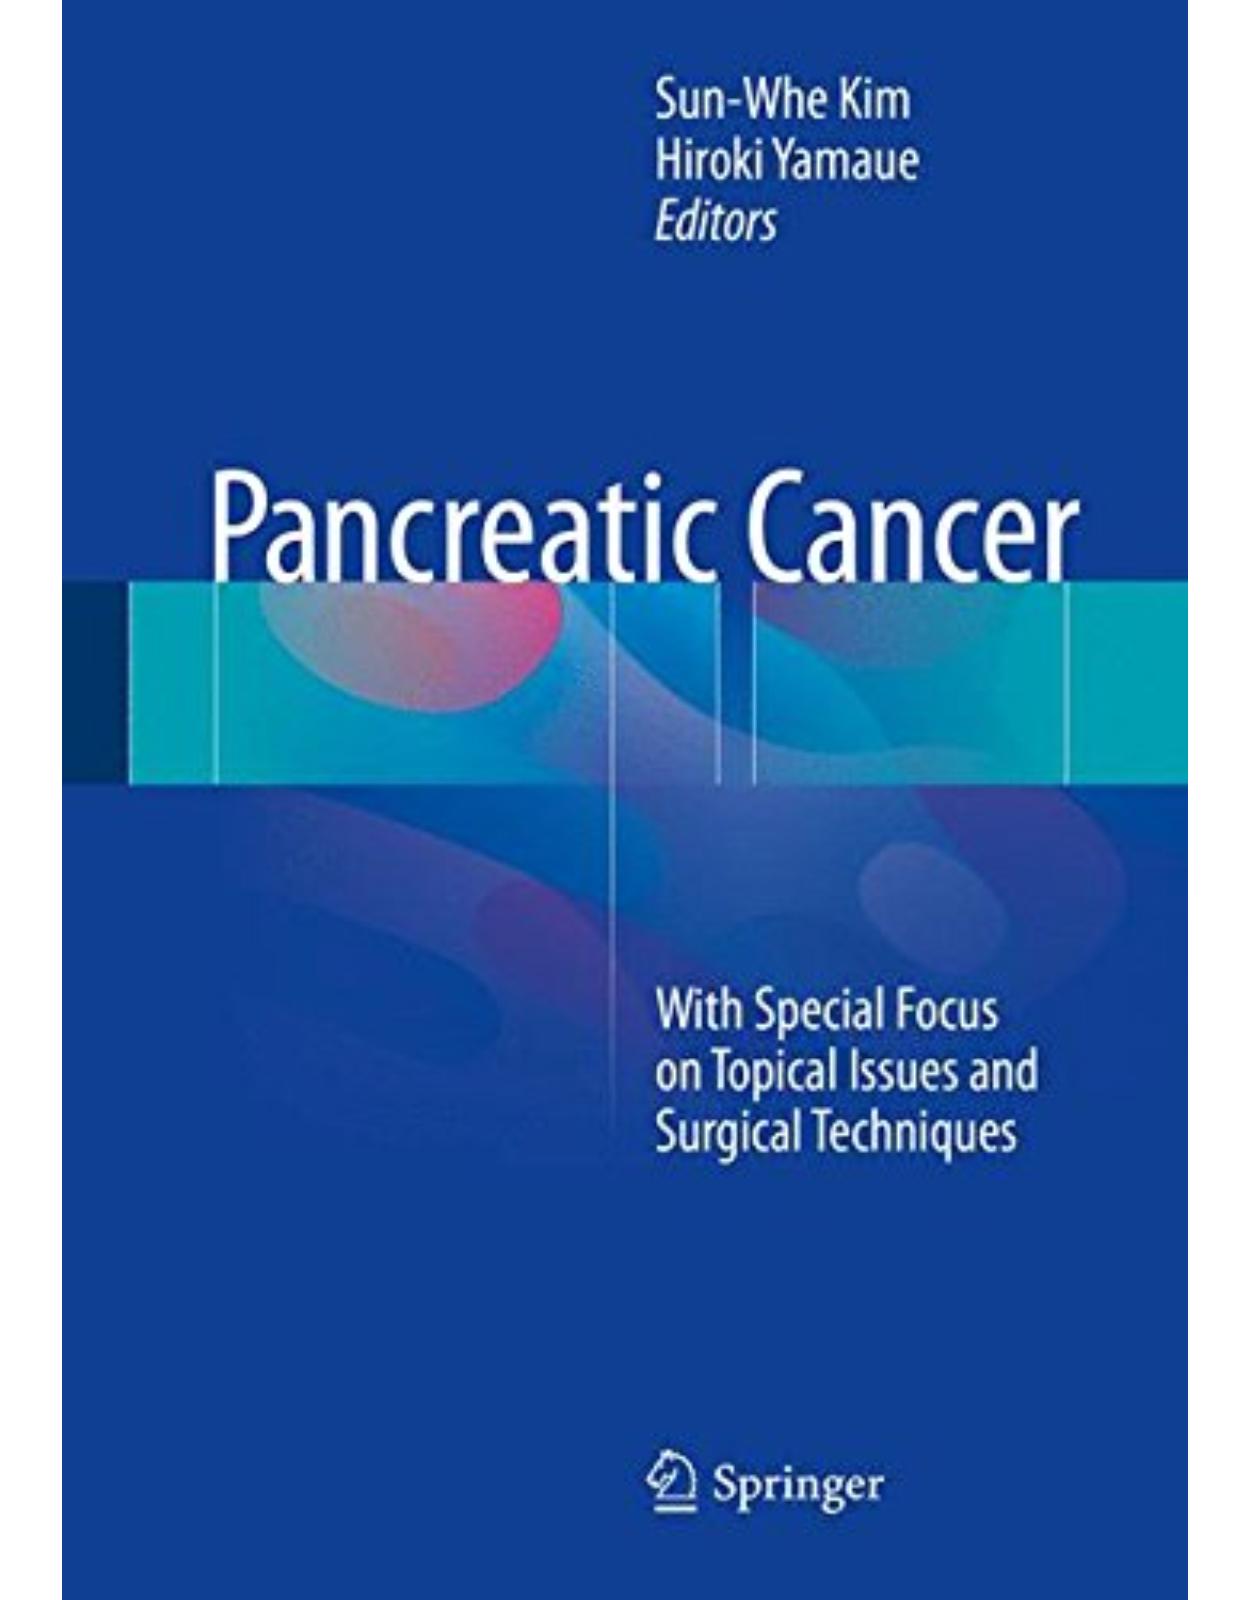 Pancreatic Cancer: With Special Focus on Topical Issues and Surgical Techniques 